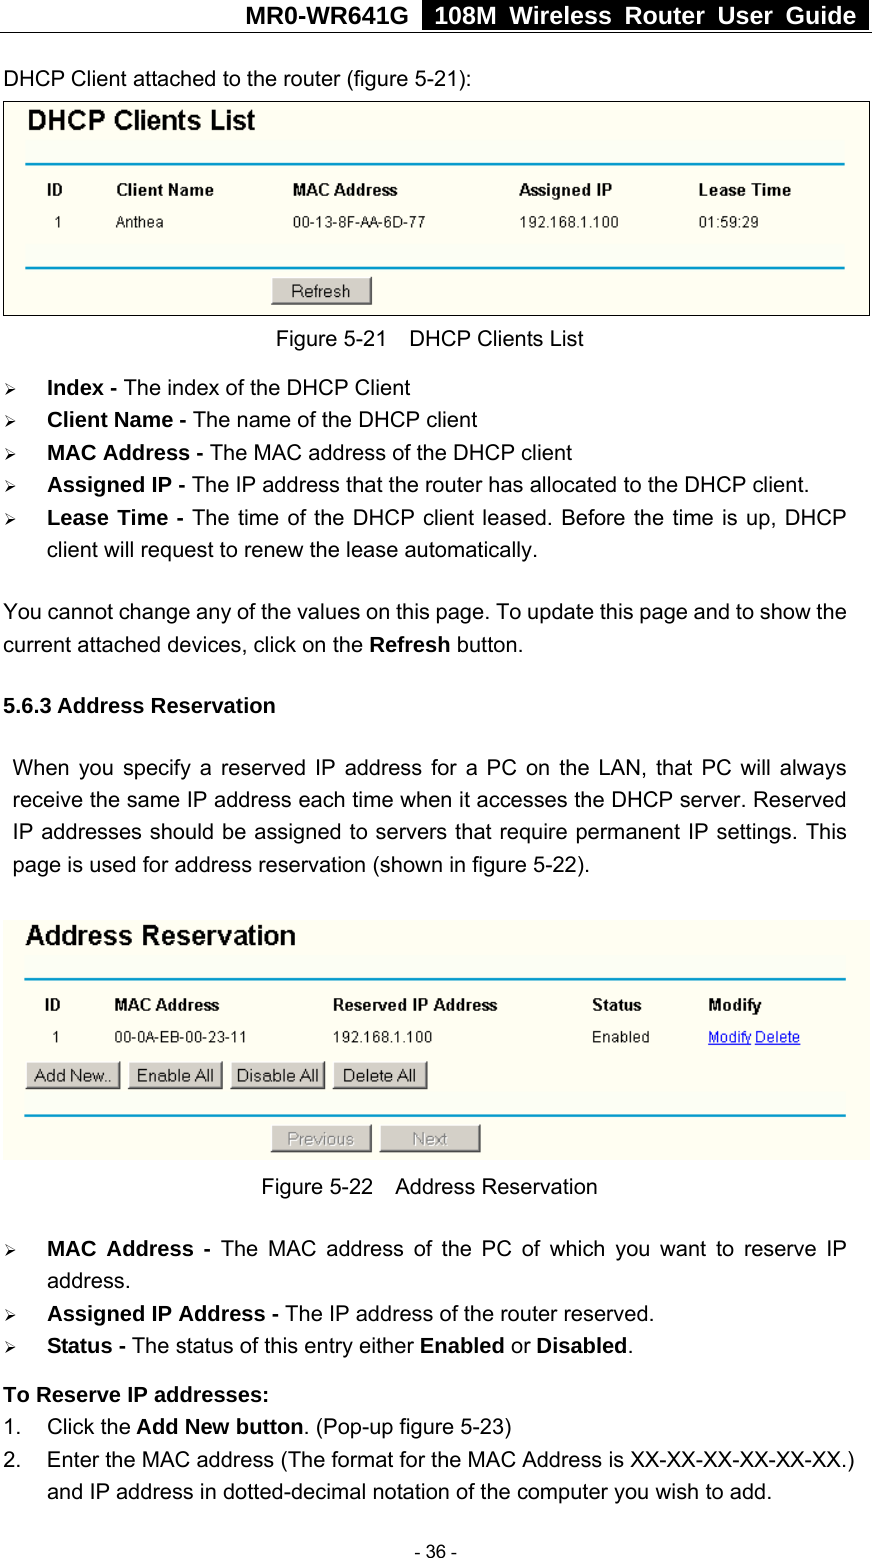 MR0-WR641G   108M Wireless Router User Guide  DHCP Client attached to the router (figure 5-21):  Figure 5-21    DHCP Clients List ¾ Index - The index of the DHCP Client   ¾ Client Name - The name of the DHCP client   ¾ MAC Address - The MAC address of the DHCP client   ¾ Assigned IP - The IP address that the router has allocated to the DHCP client. ¾ Lease Time - The time of the DHCP client leased. Before the time is up, DHCP client will request to renew the lease automatically. You cannot change any of the values on this page. To update this page and to show the current attached devices, click on the Refresh button. 5.6.3 Address Reservation When you specify a reserved IP address for a PC on the LAN, that PC will always receive the same IP address each time when it accesses the DHCP server. Reserved IP addresses should be assigned to servers that require permanent IP settings. This page is used for address reservation (shown in figure 5-22).  Figure 5-22  Address Reservation ¾ MAC Address - The MAC address of the PC of which you want to reserve IP address. ¾ Assigned IP Address - The IP address of the router reserved. ¾ Status - The status of this entry either Enabled or Disabled. To Reserve IP addresses:  1. Click the Add New button. (Pop-up figure 5-23) 2.  Enter the MAC address (The format for the MAC Address is XX-XX-XX-XX-XX-XX.) and IP address in dotted-decimal notation of the computer you wish to add.    - 36 - 